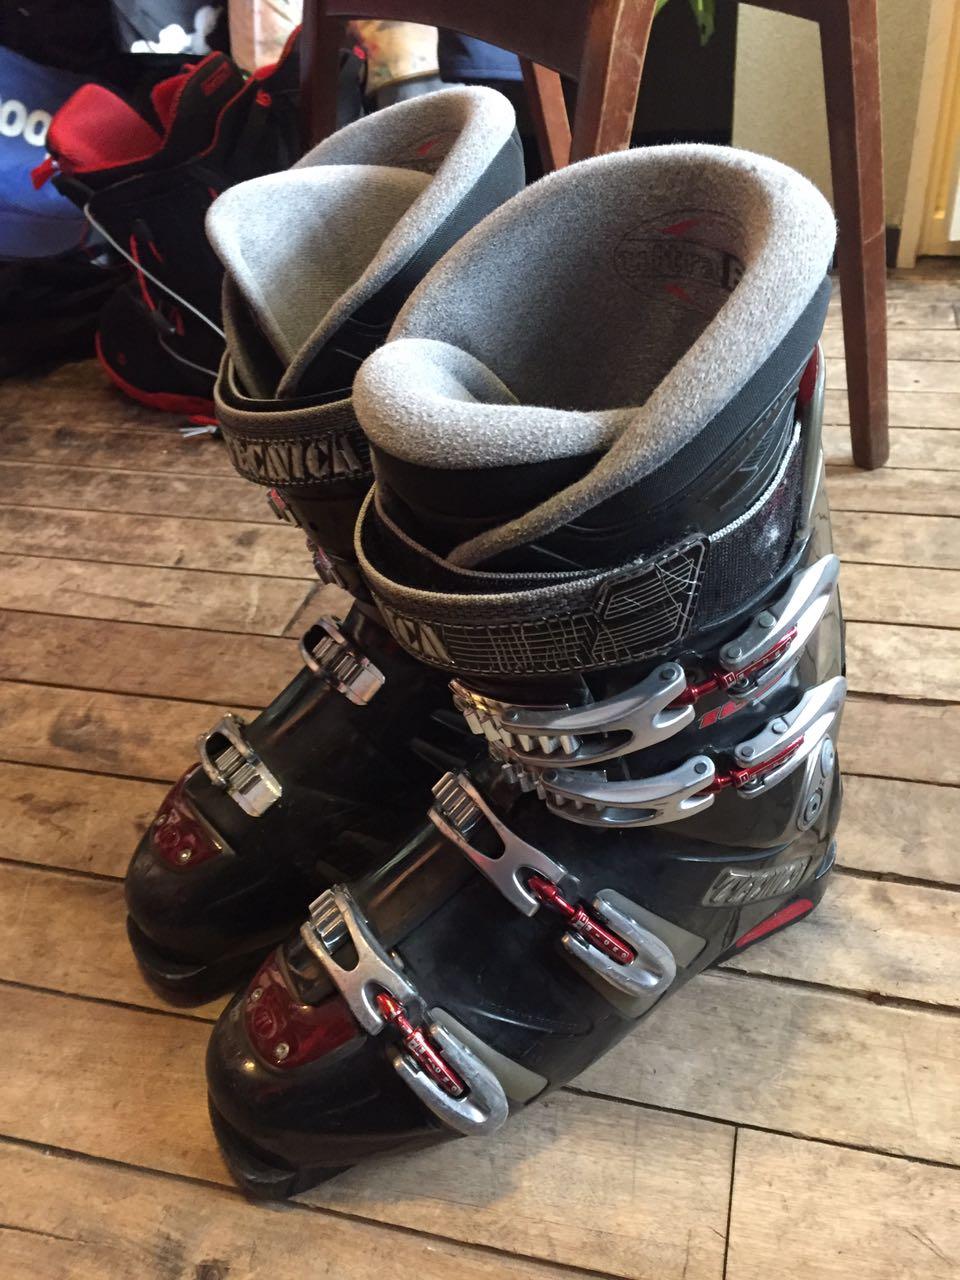 Secondhand Ski Boots For Sale | For 